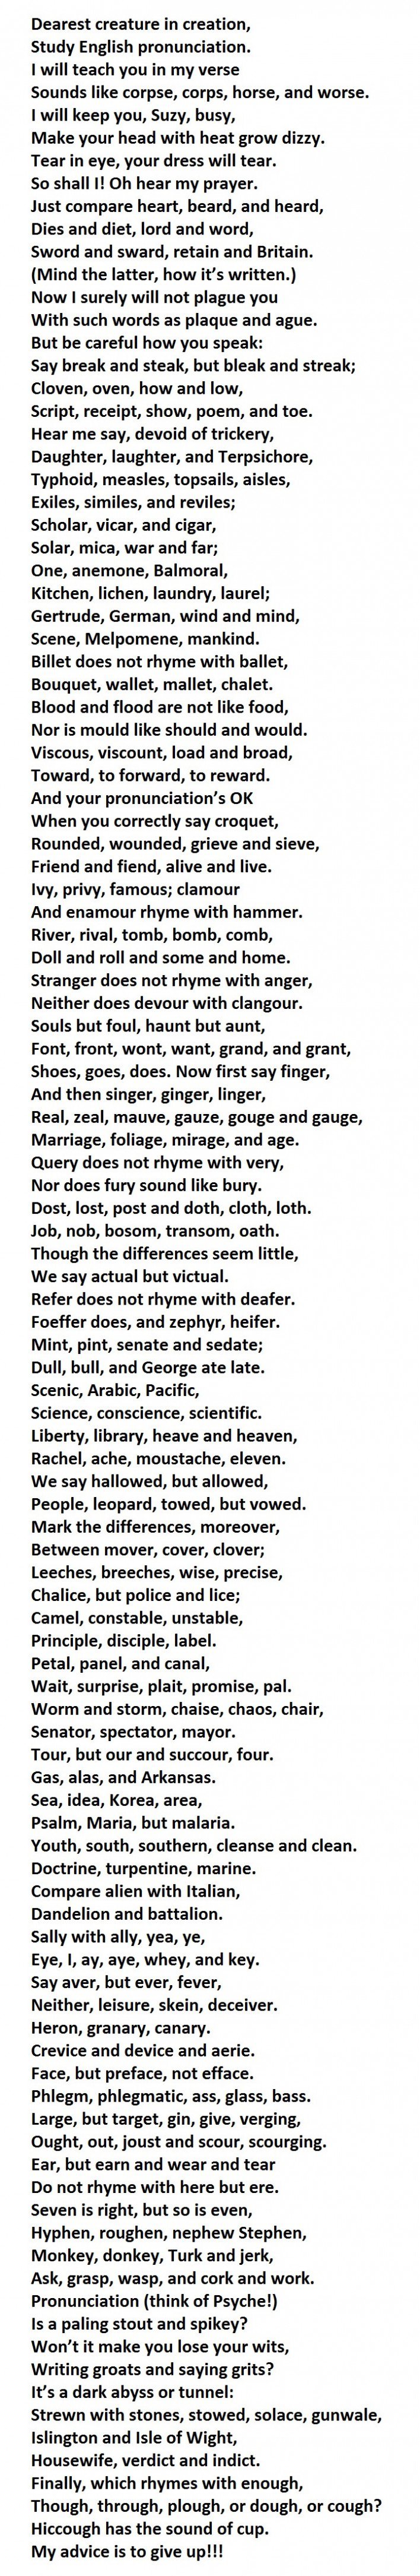 90 Of People Can't Pronounce This Whole Poem... Can You?